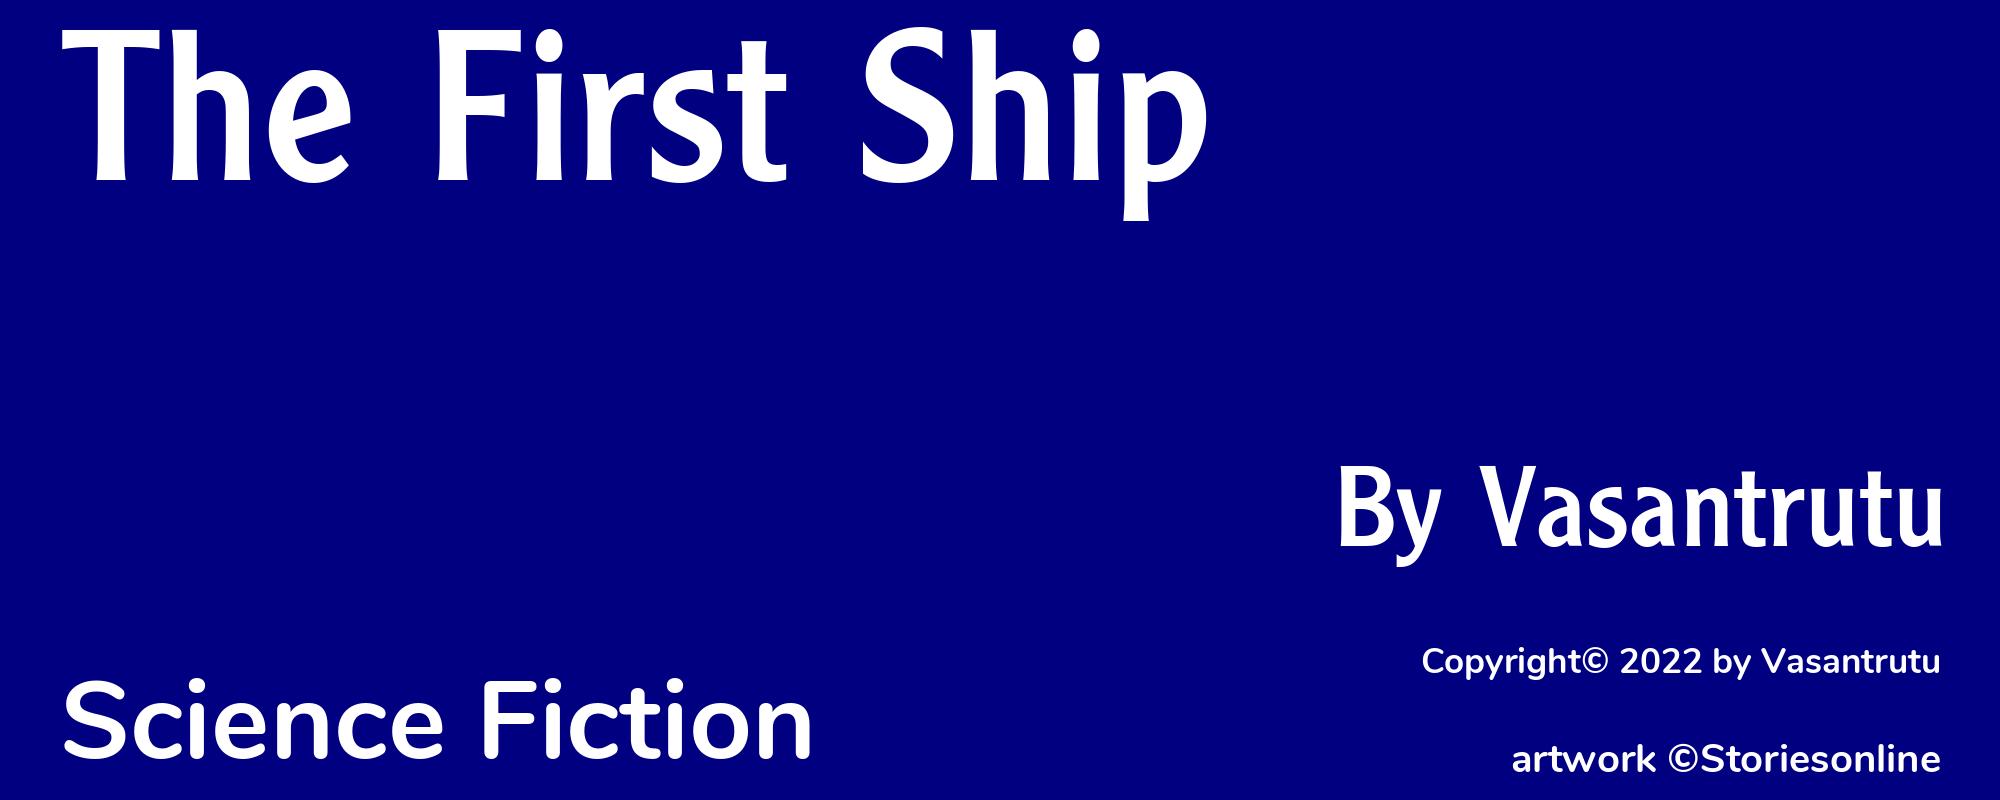 The First Ship - Cover